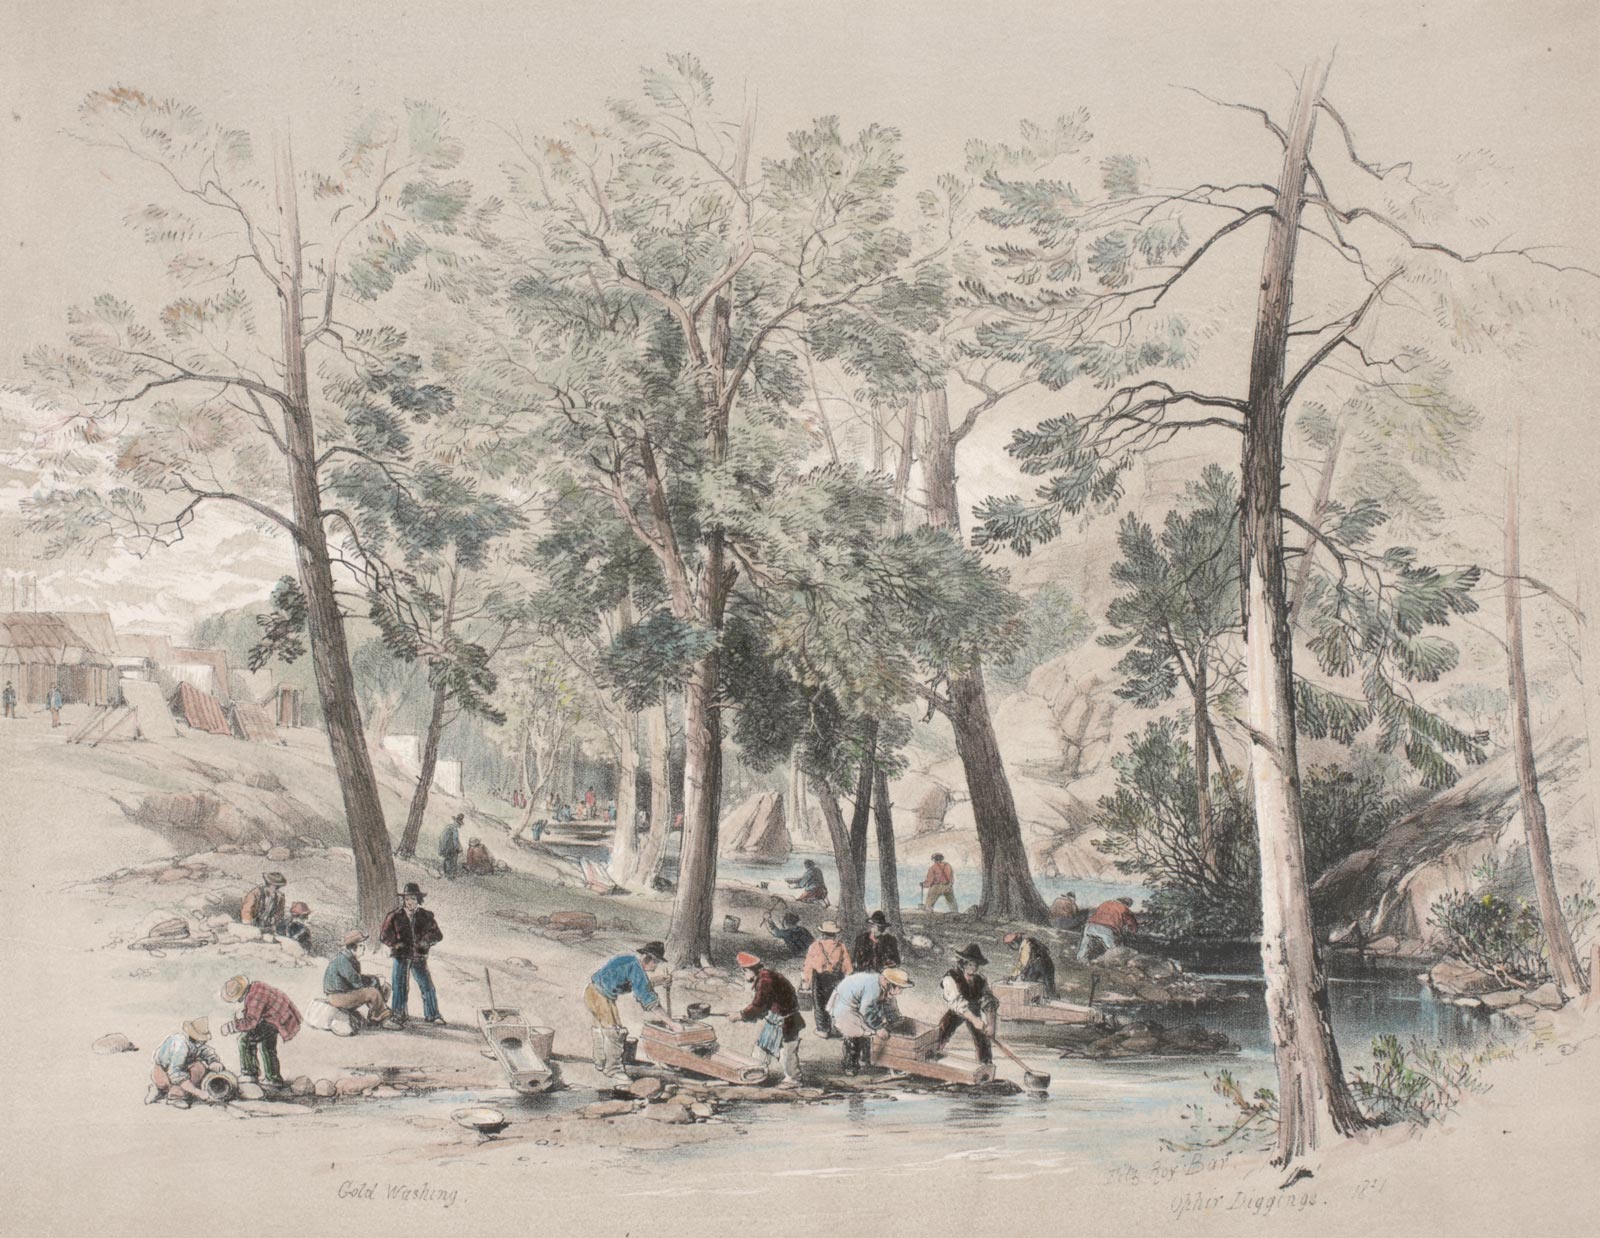 <p><em>Gold Washing. Fitz Roy Bar, Ophir Diggings, 1851</em>, by George Angas</p>
